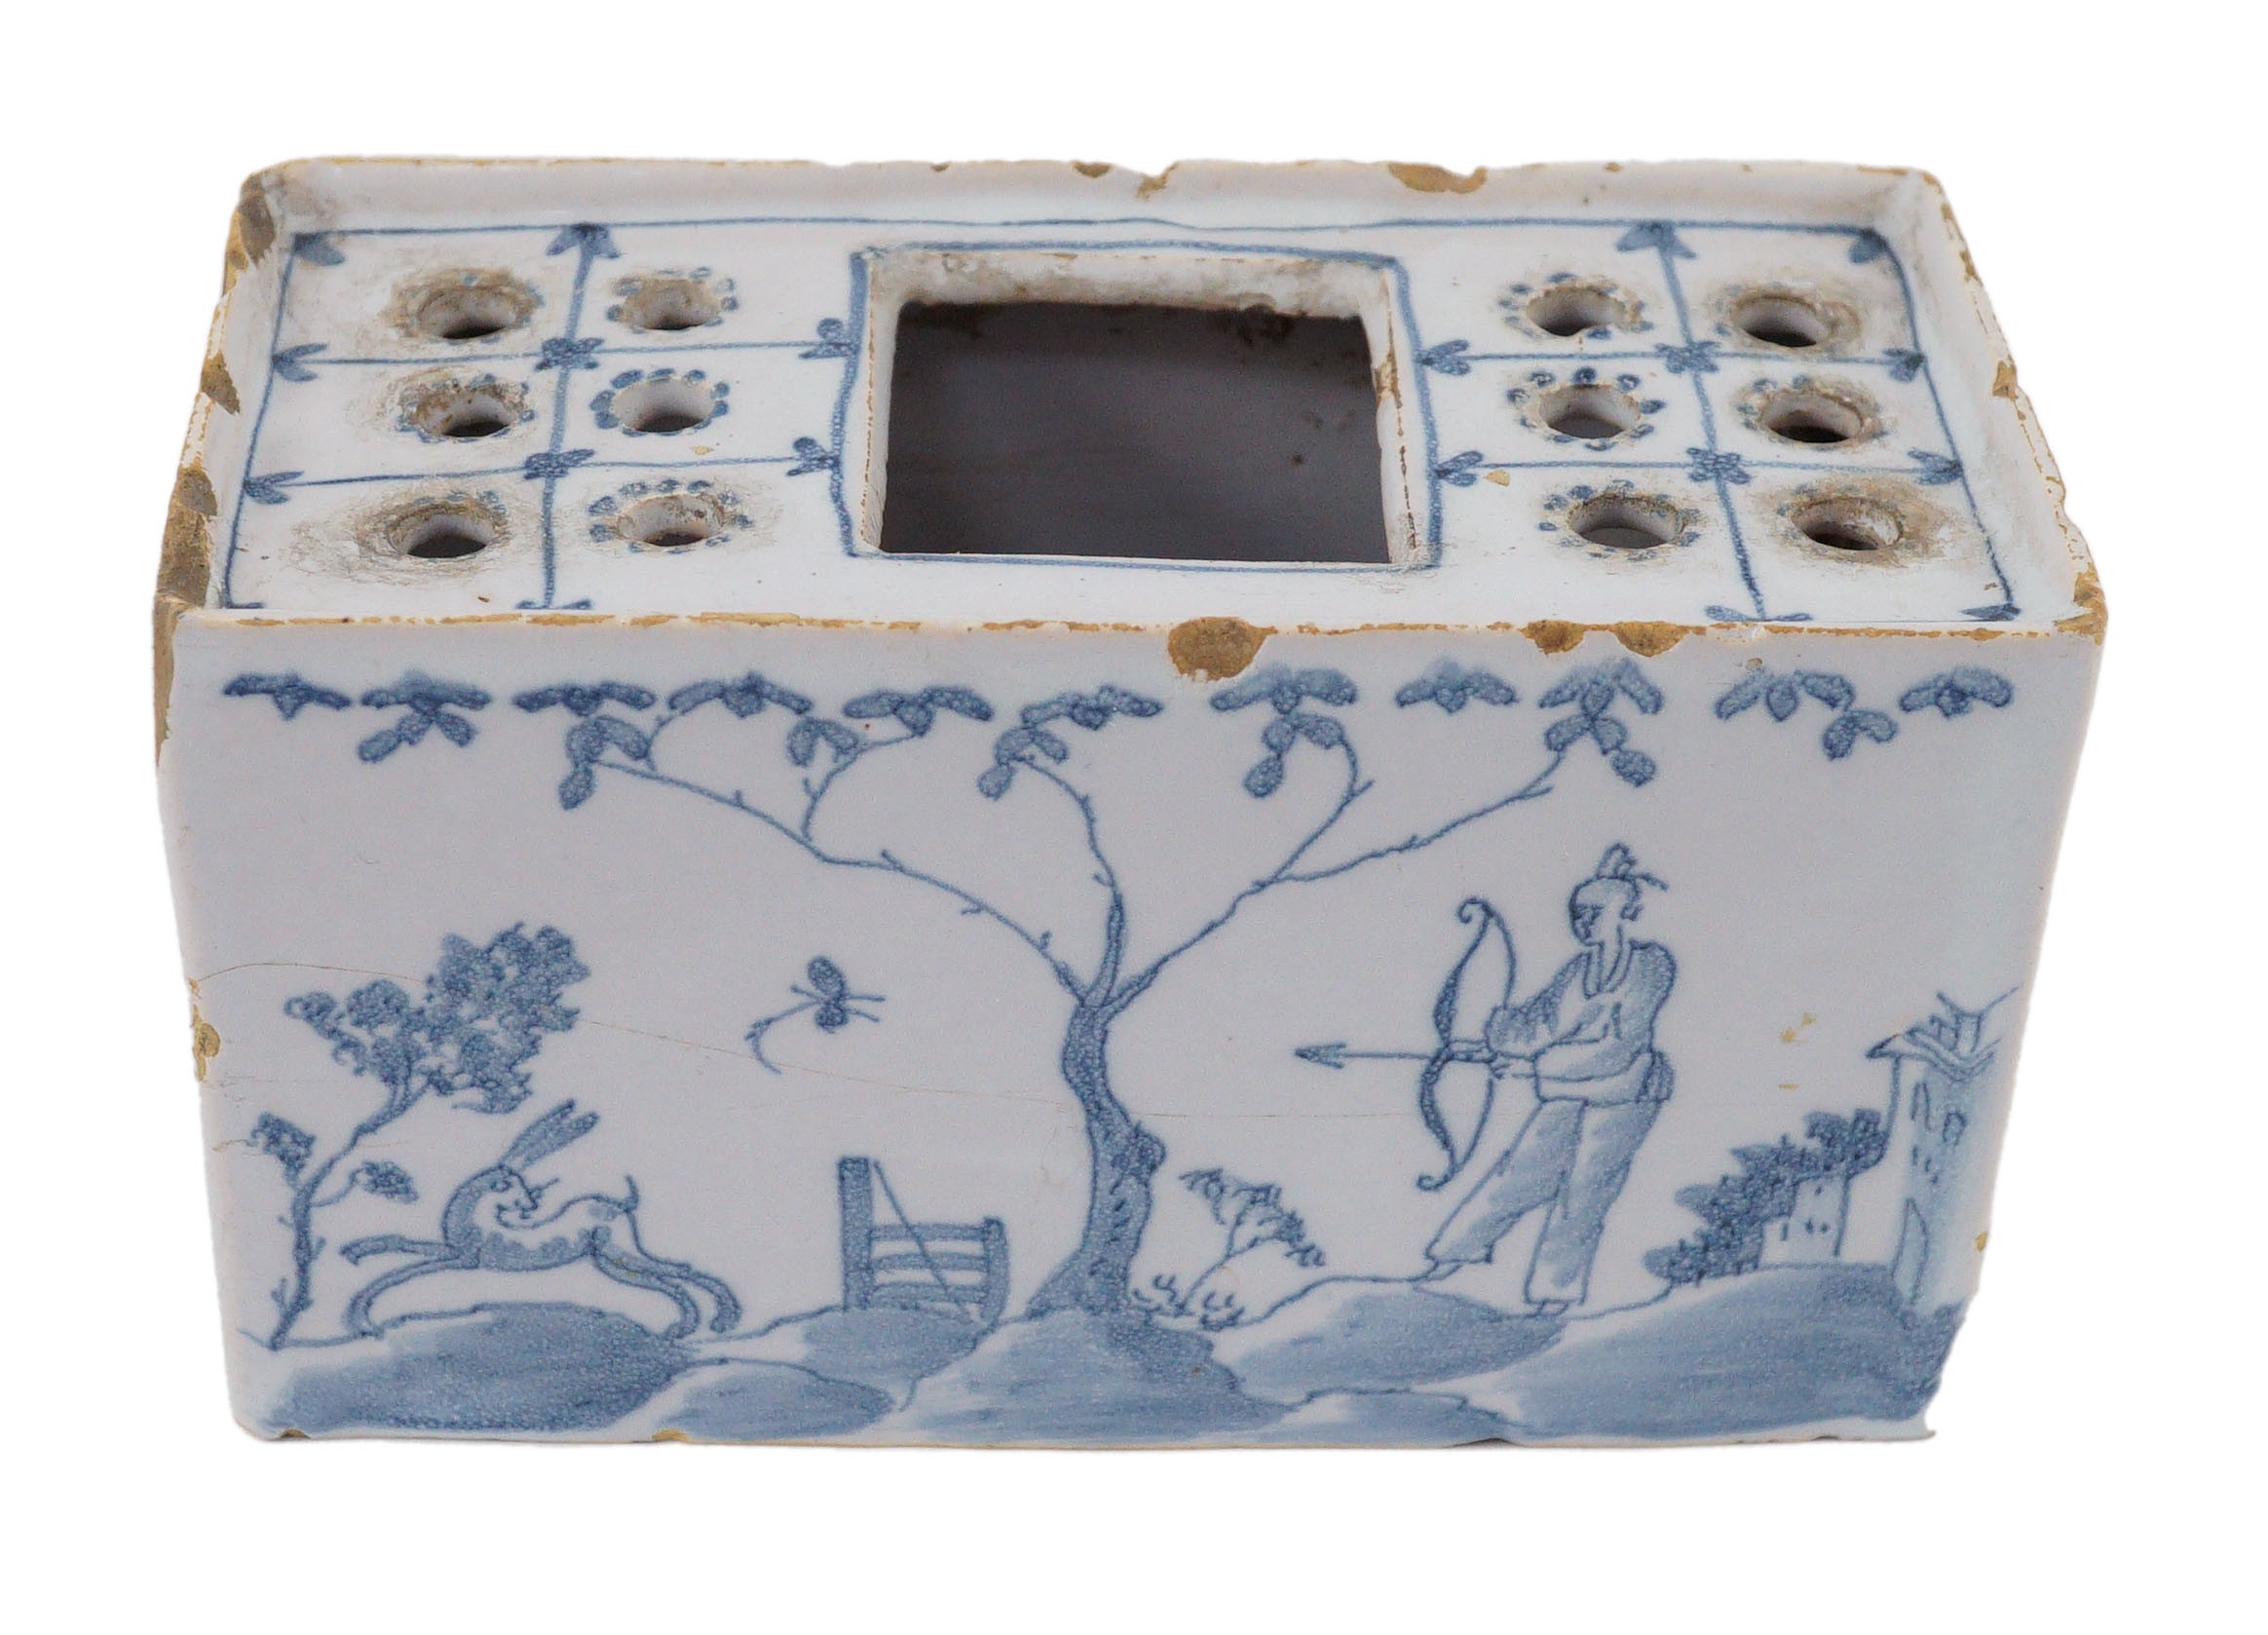 An English delftware flower brick, mid 18th century, 14.5cm wide, chips and crack